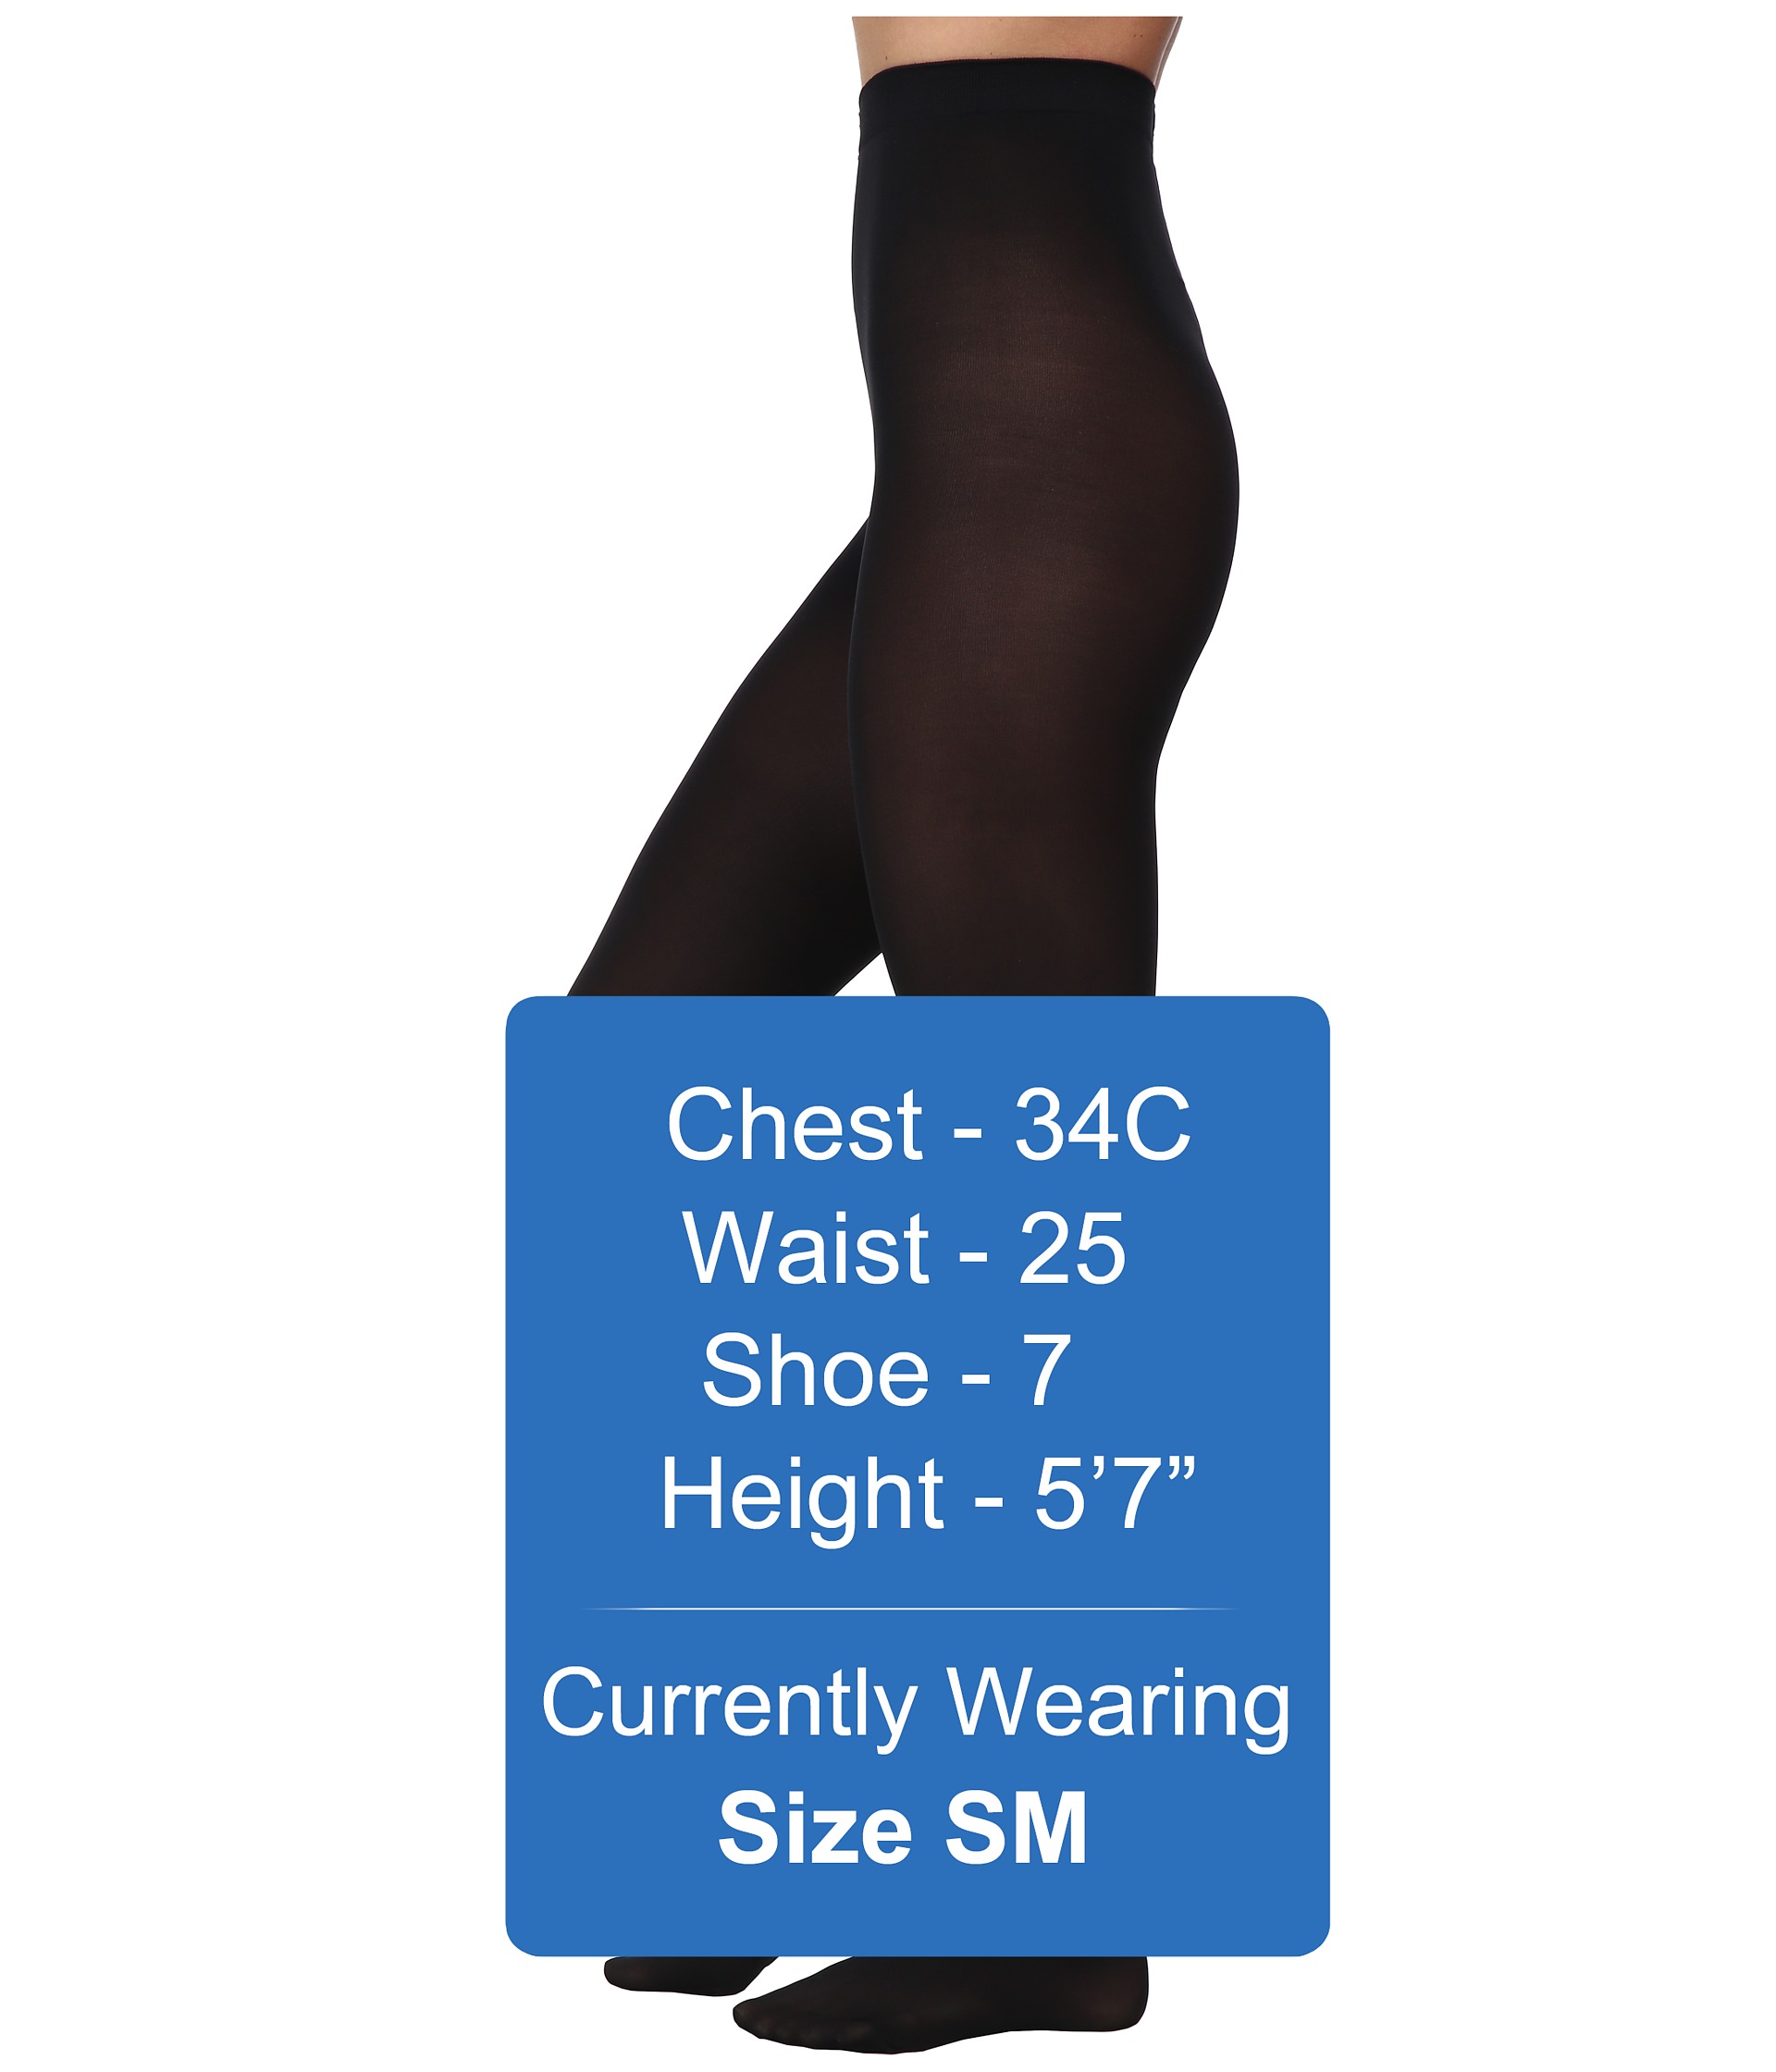 Wolford Velvet De Luxe 66 Tights at Zappos.com